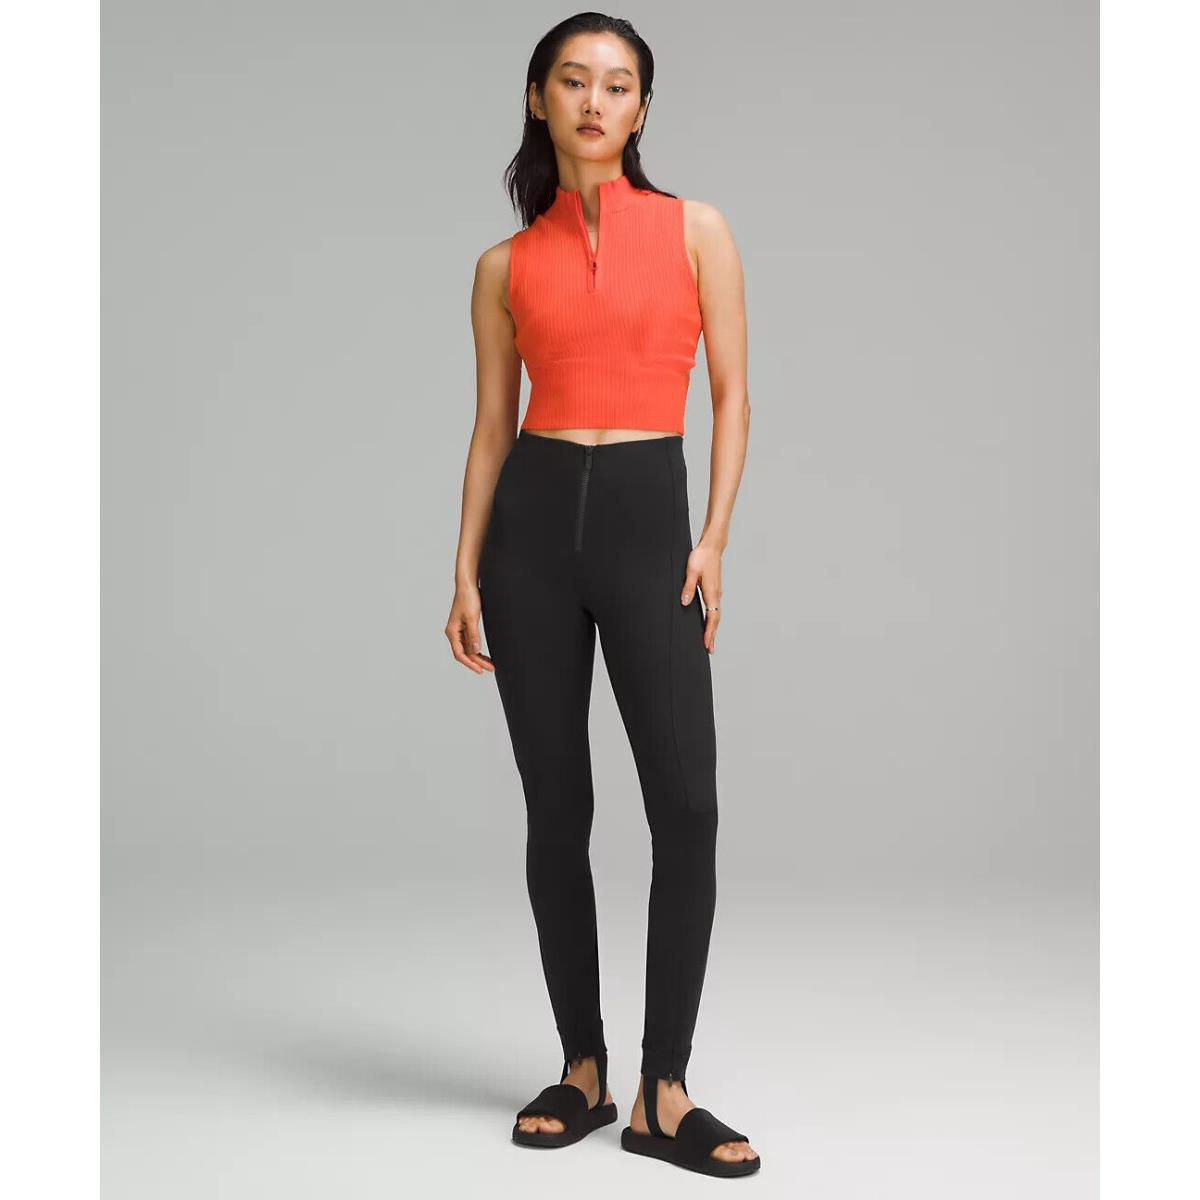 Lululemon Pull-on Zip-front High Rise Pant - Retail